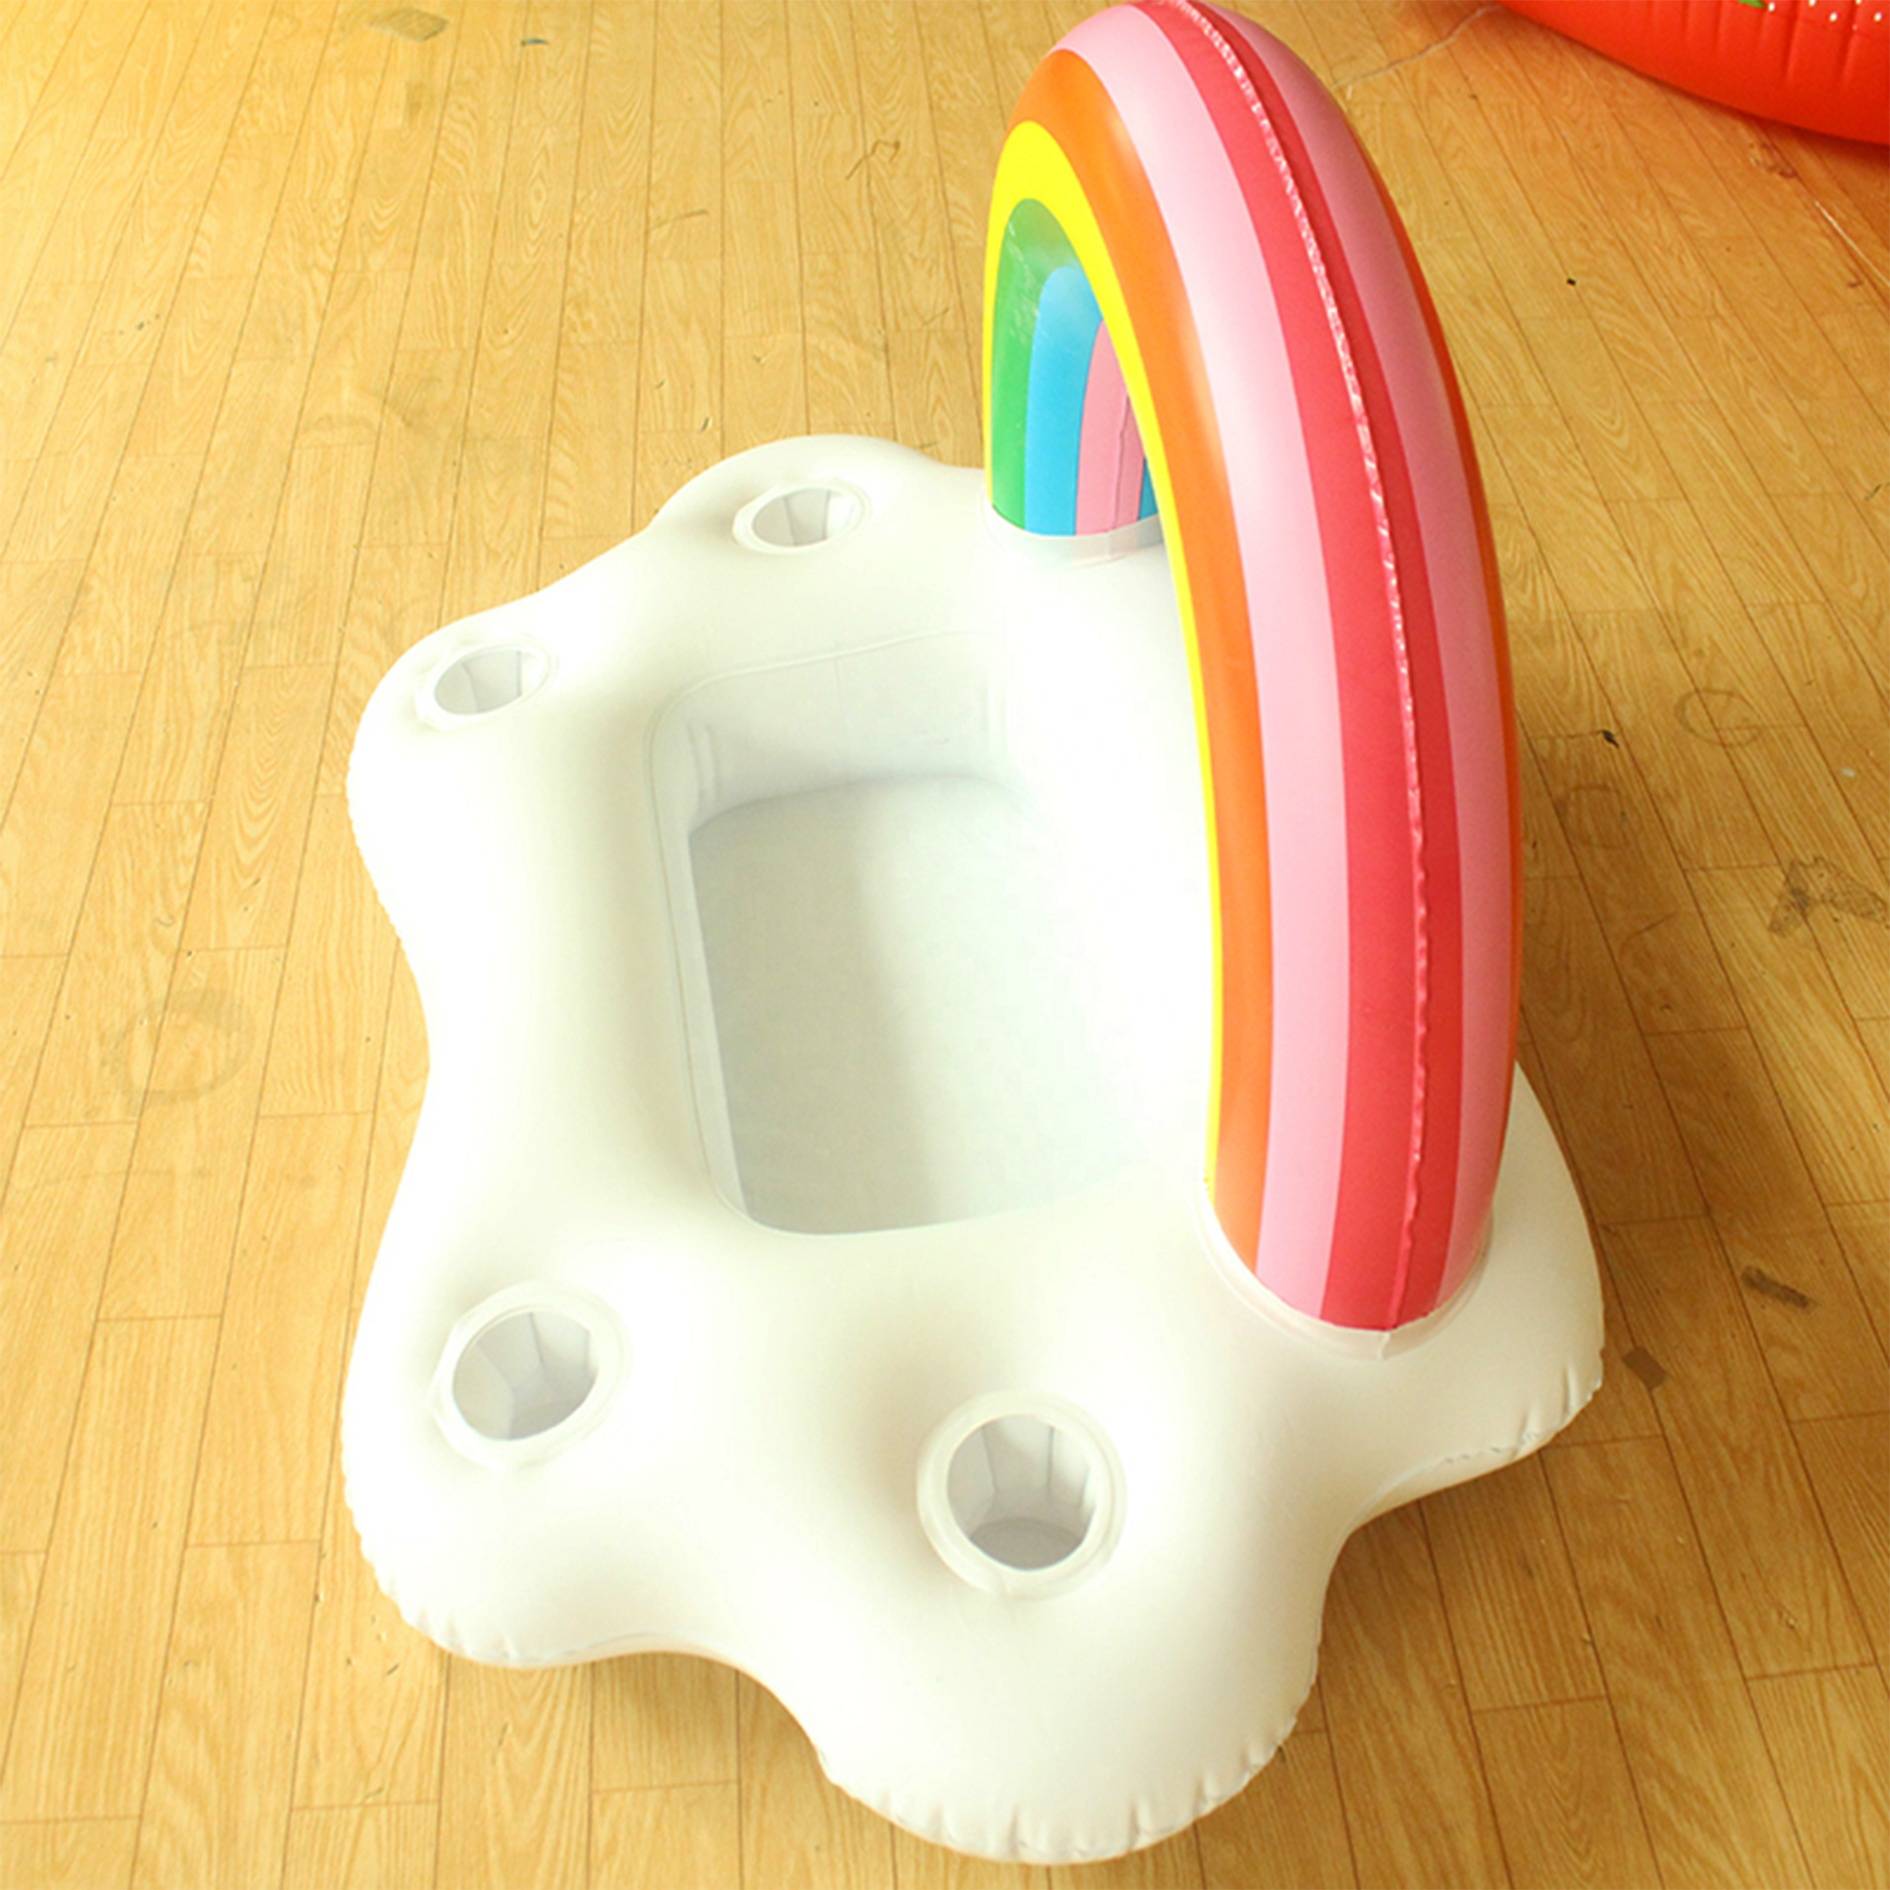 Customised Inflatable Rainbow Cup Holder Beverage Cooler Holder For Themed Party Parties Food Beer